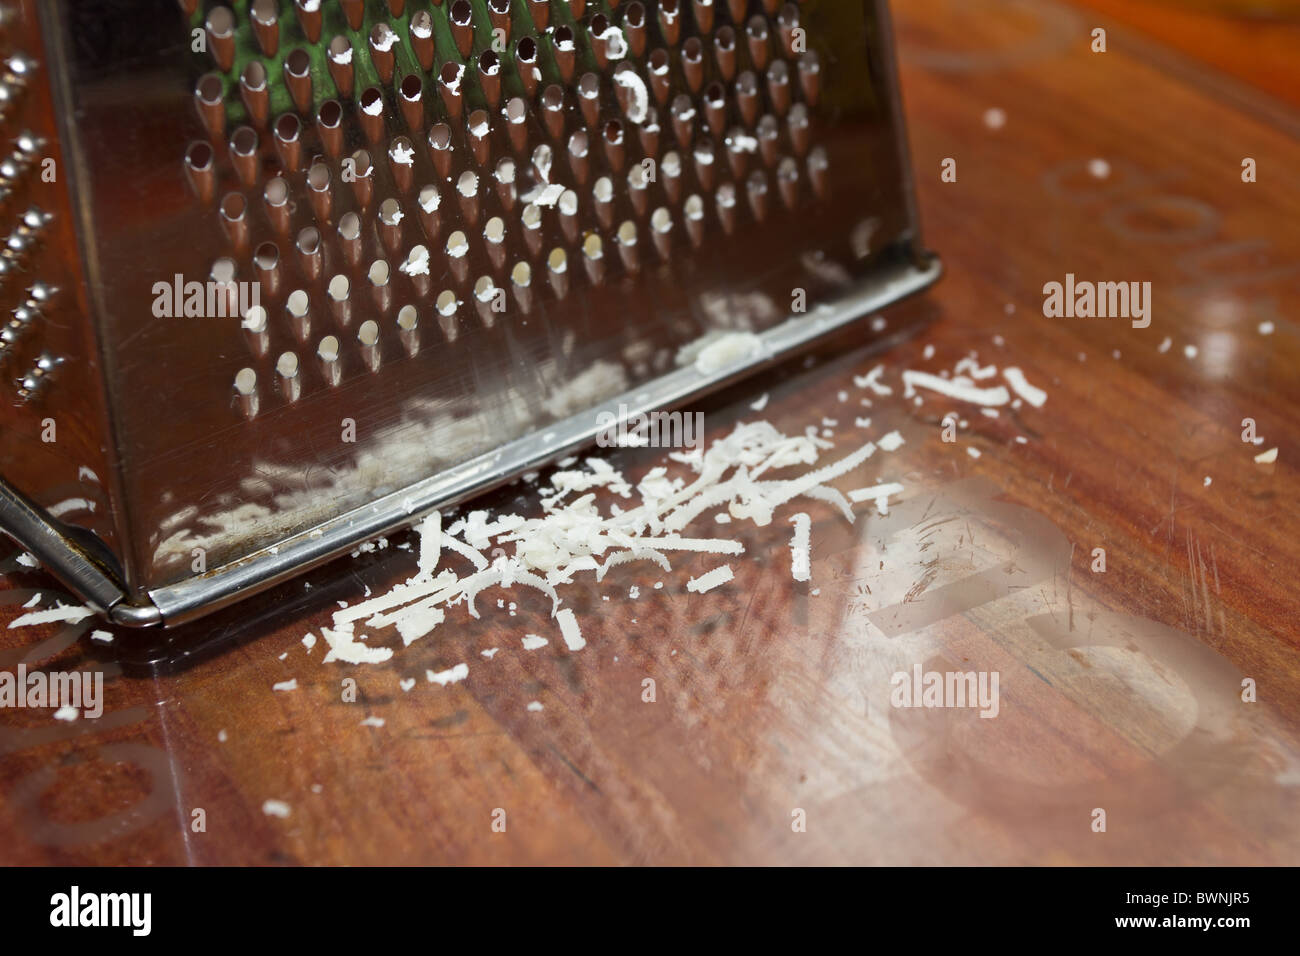 Slivers of grated Parmesan cheese next to worn cheese grater. Stock Photo